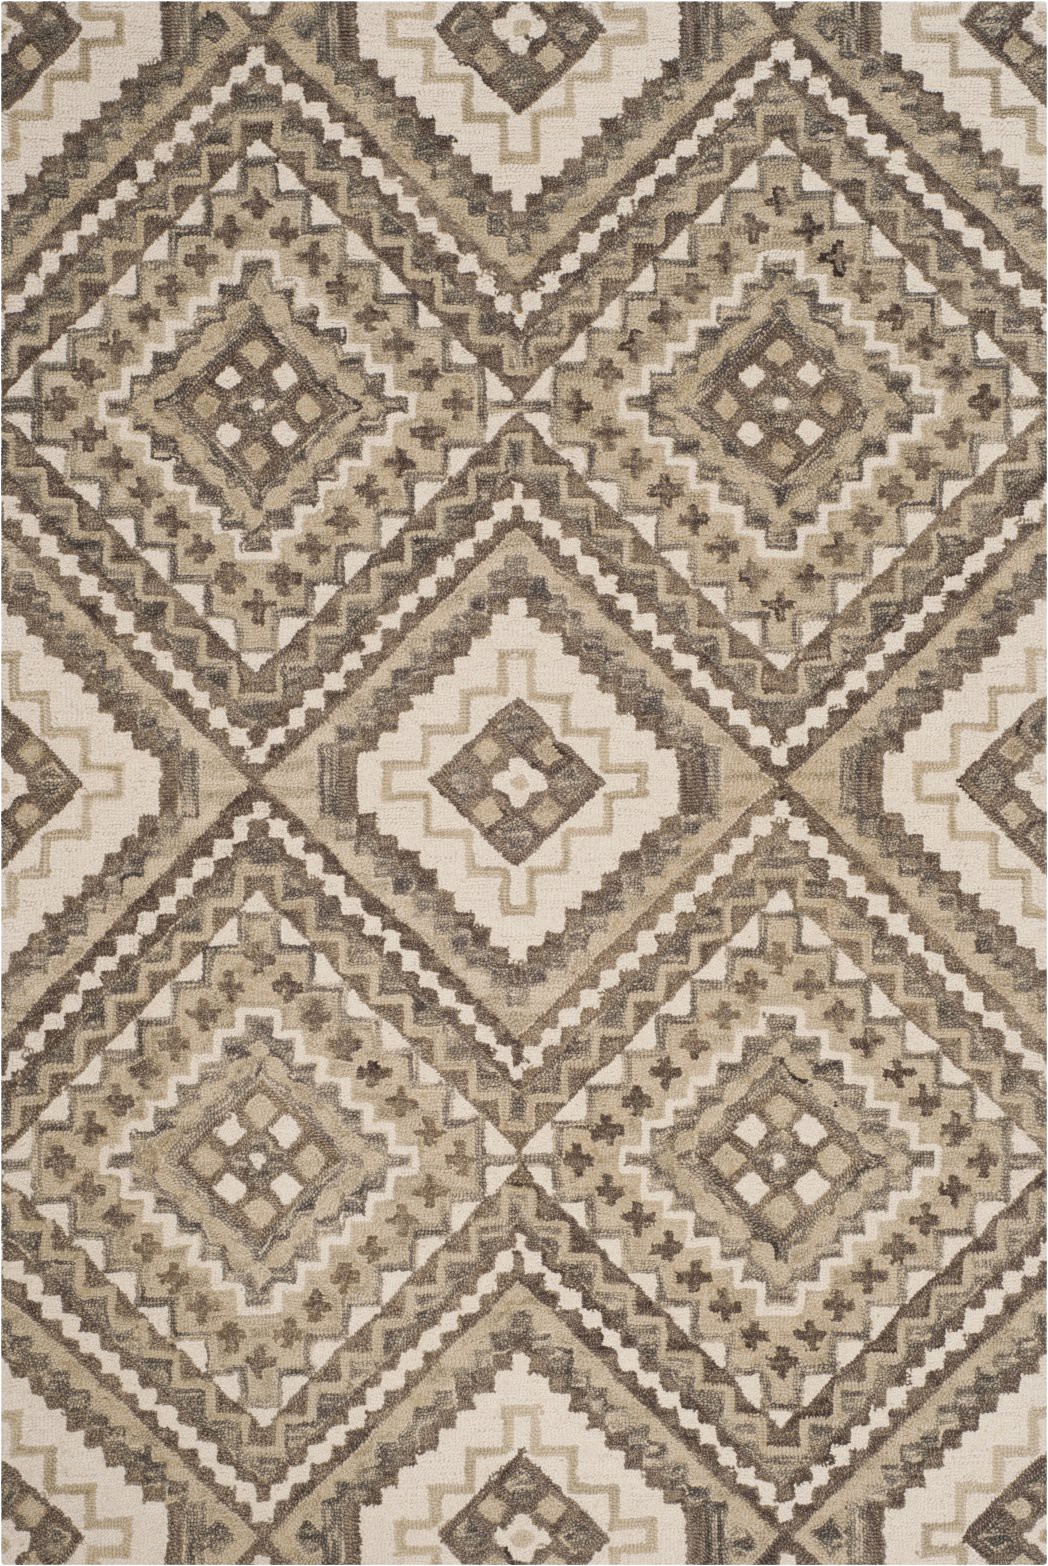 Taupe and Brown area Rug Safavieh aspen 250 Taupe Ivory area Rug